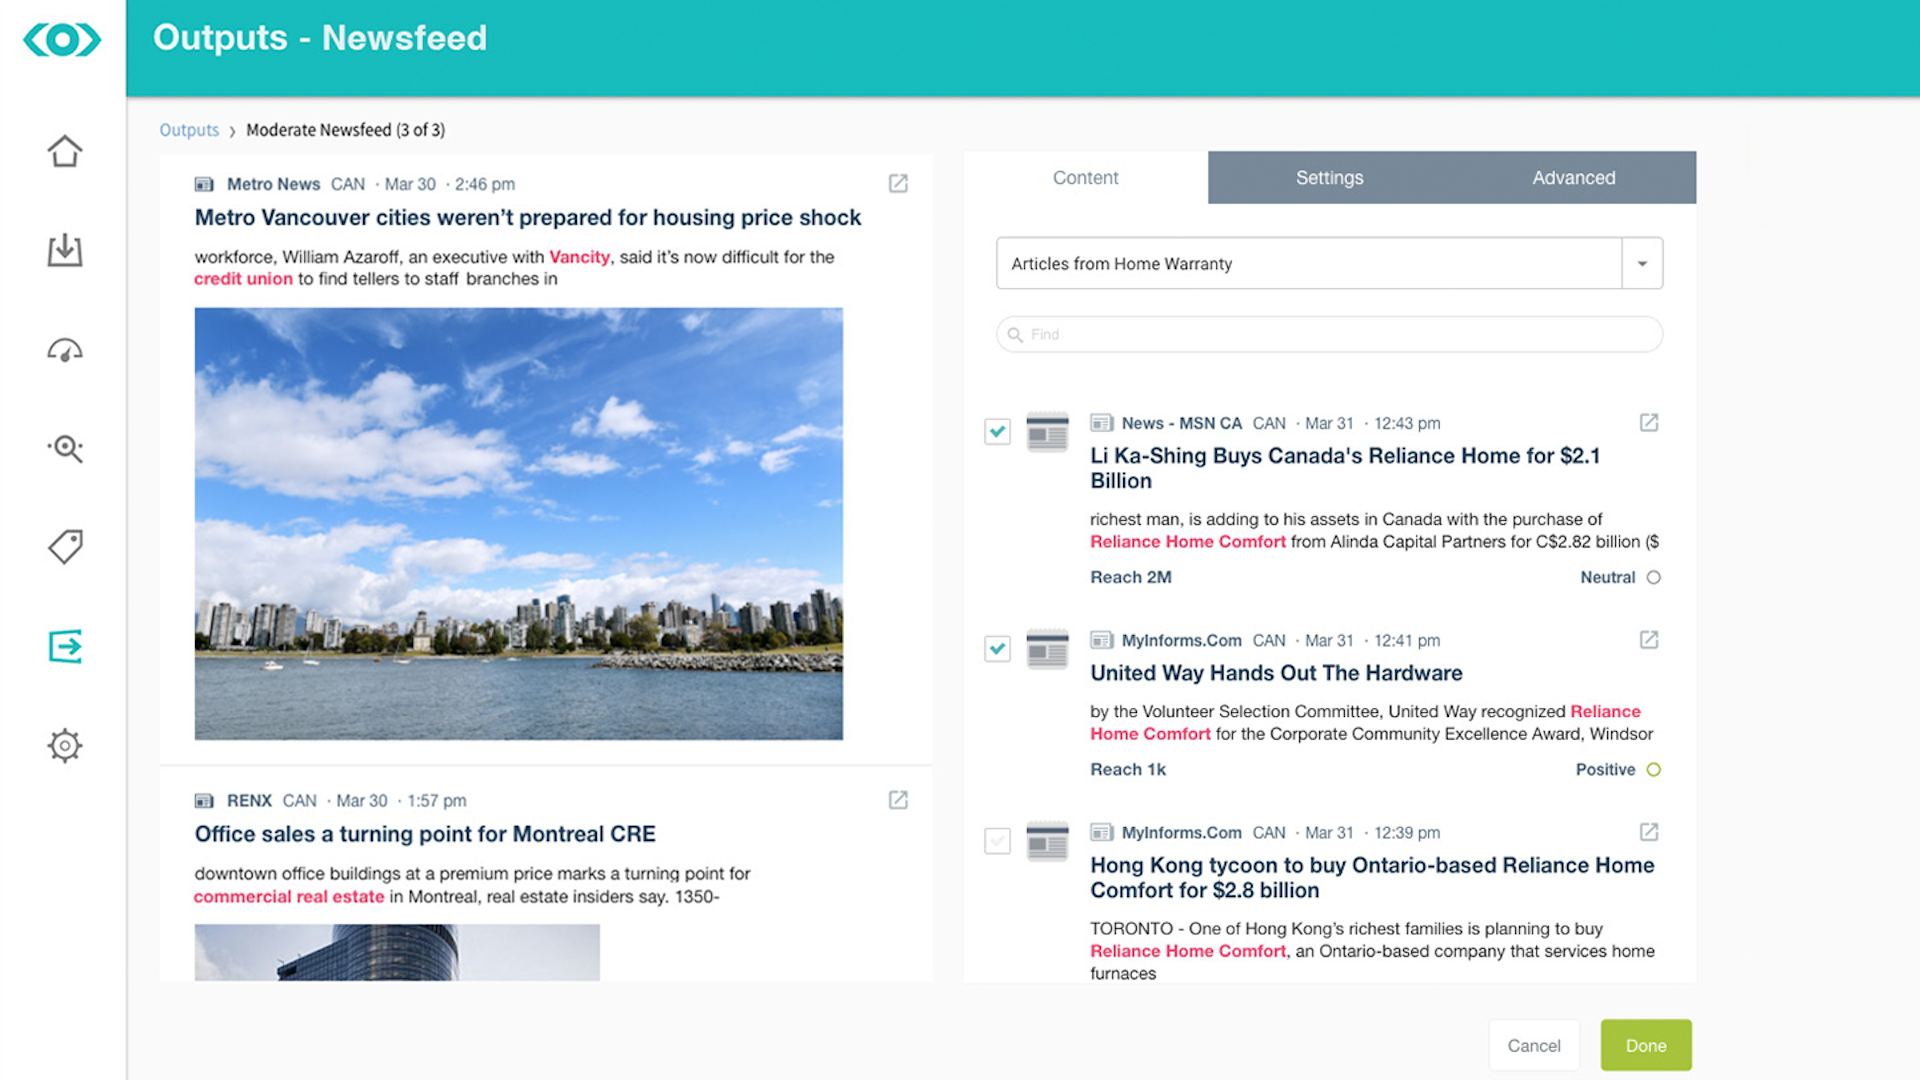 Screenshot of a Meltwater Newsfeed